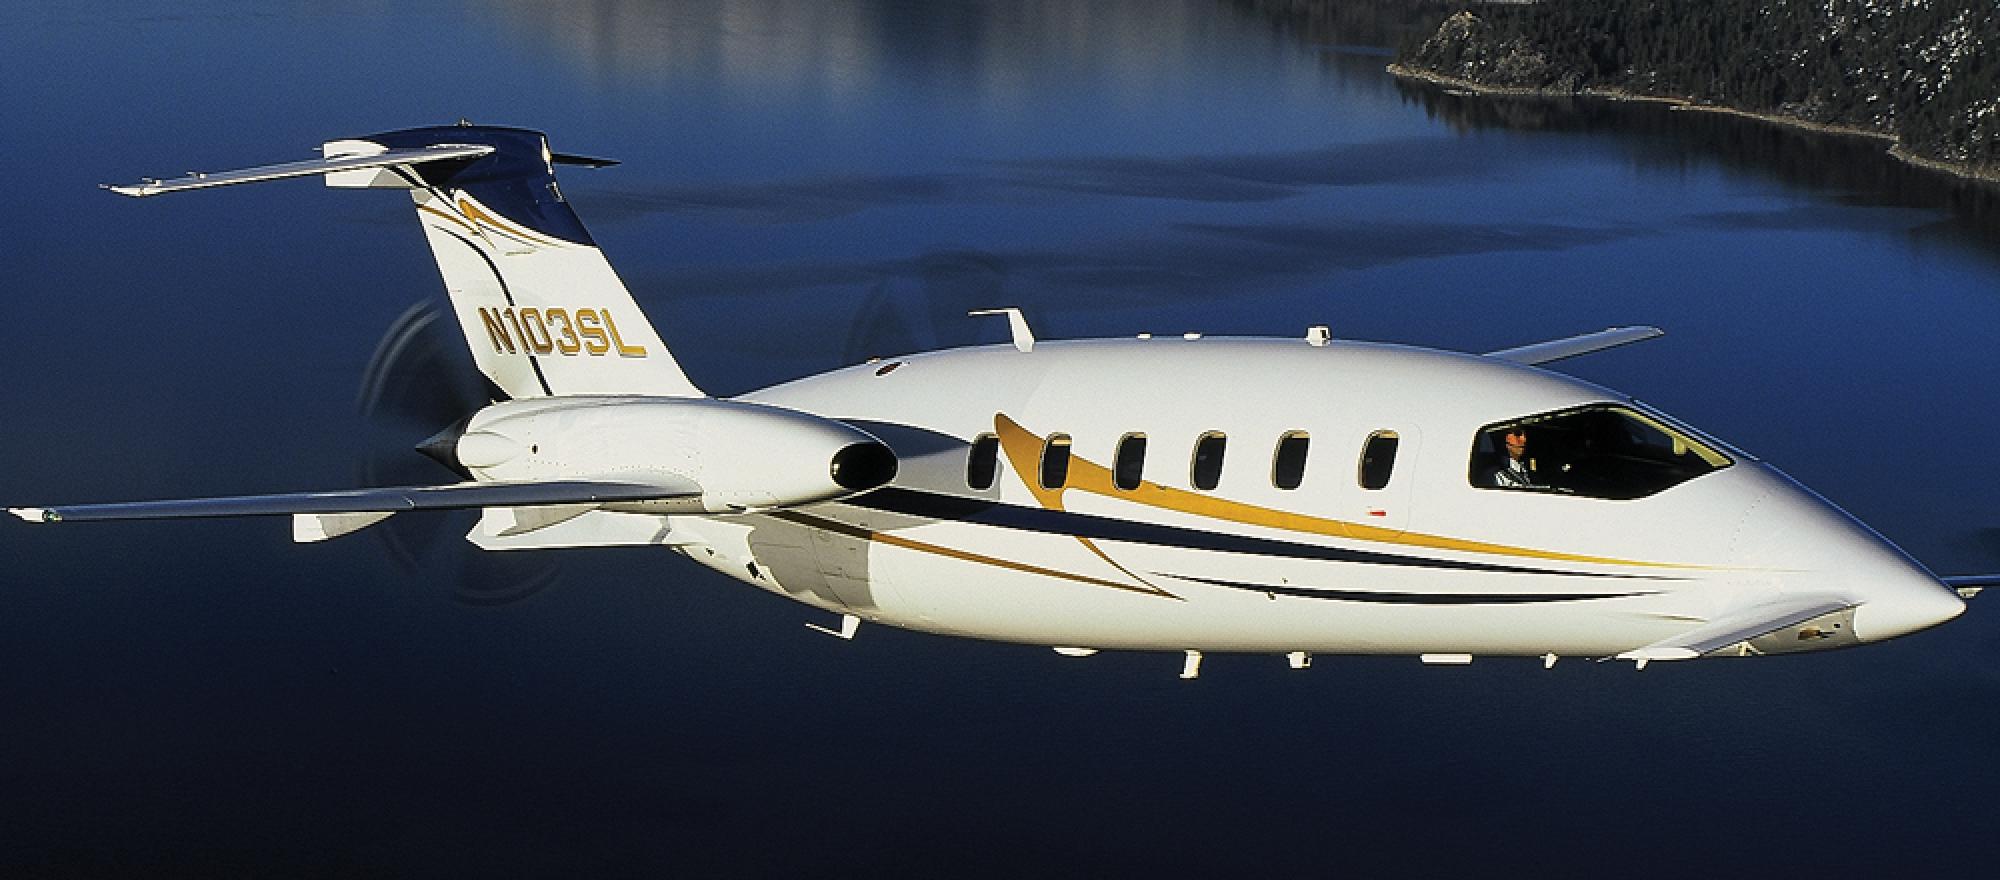 Avantair’s 56 Piaggio Avanti twin turboprops have been grounded since June 6.